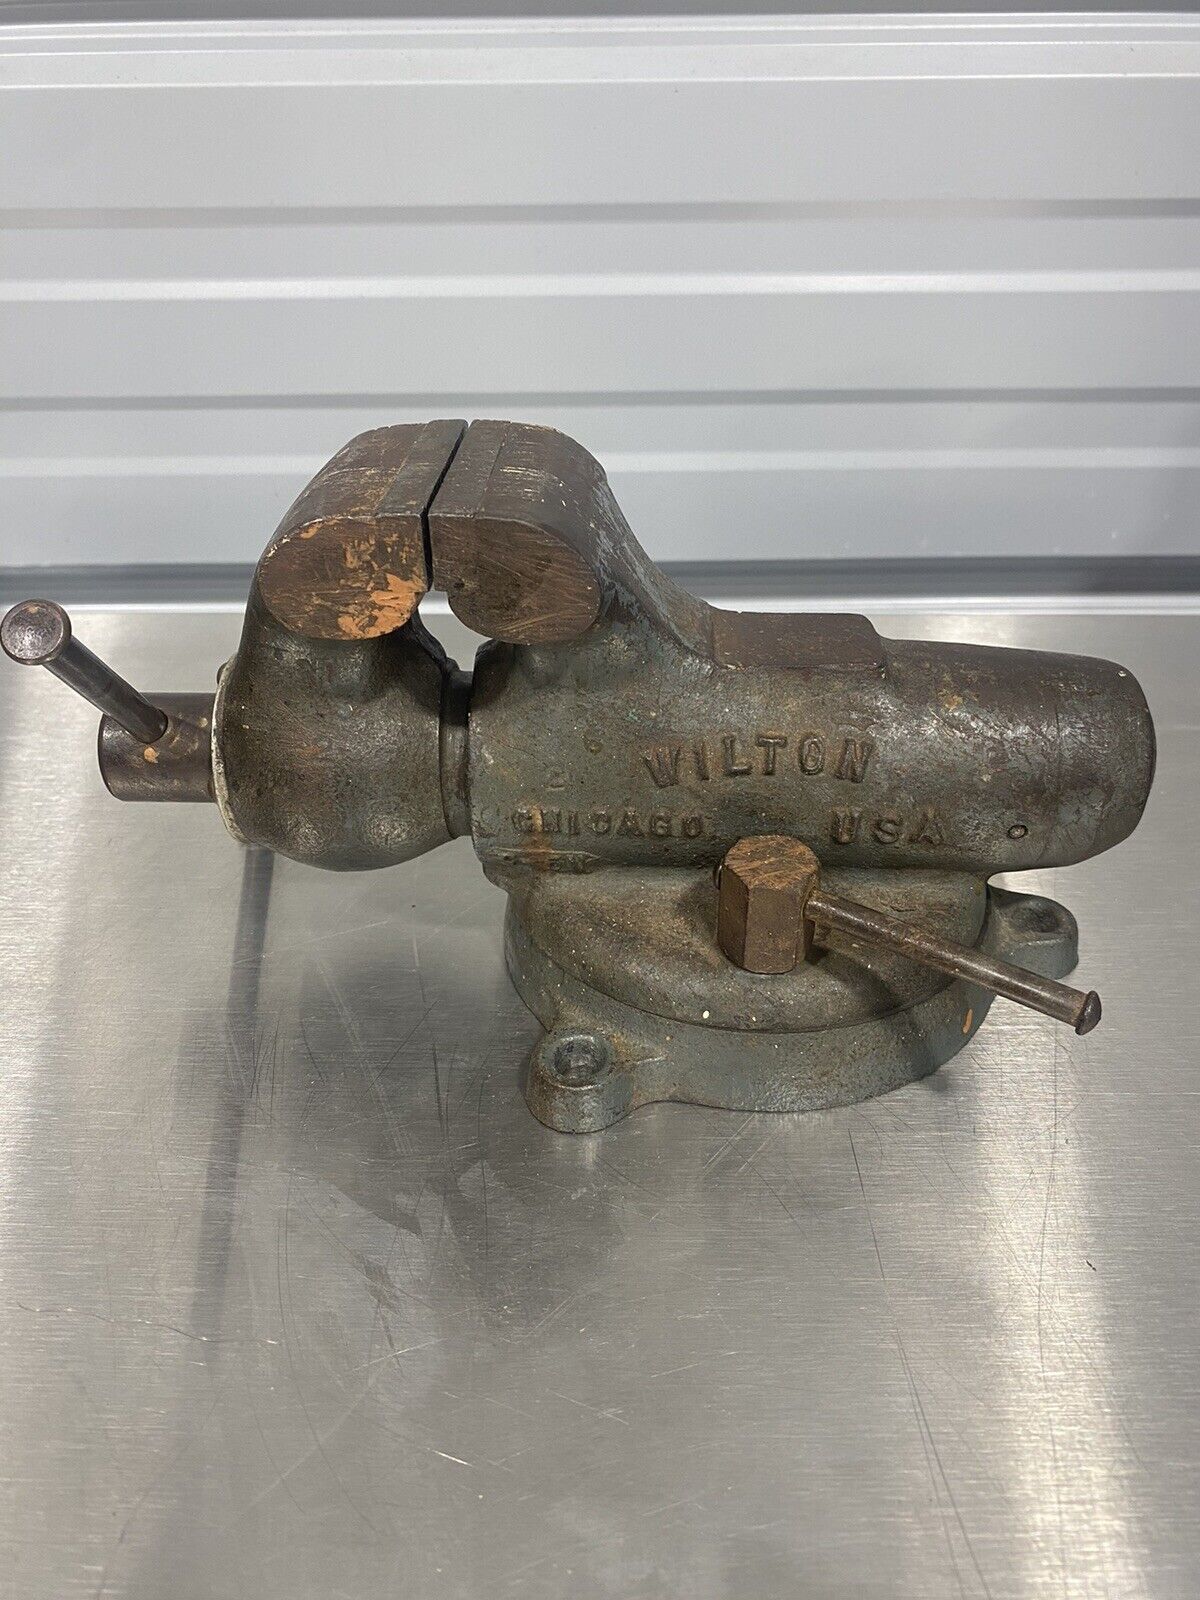 Wilton Bullet 825 Vise - No.5 - 101009- Chicago USA - Dated 12/68